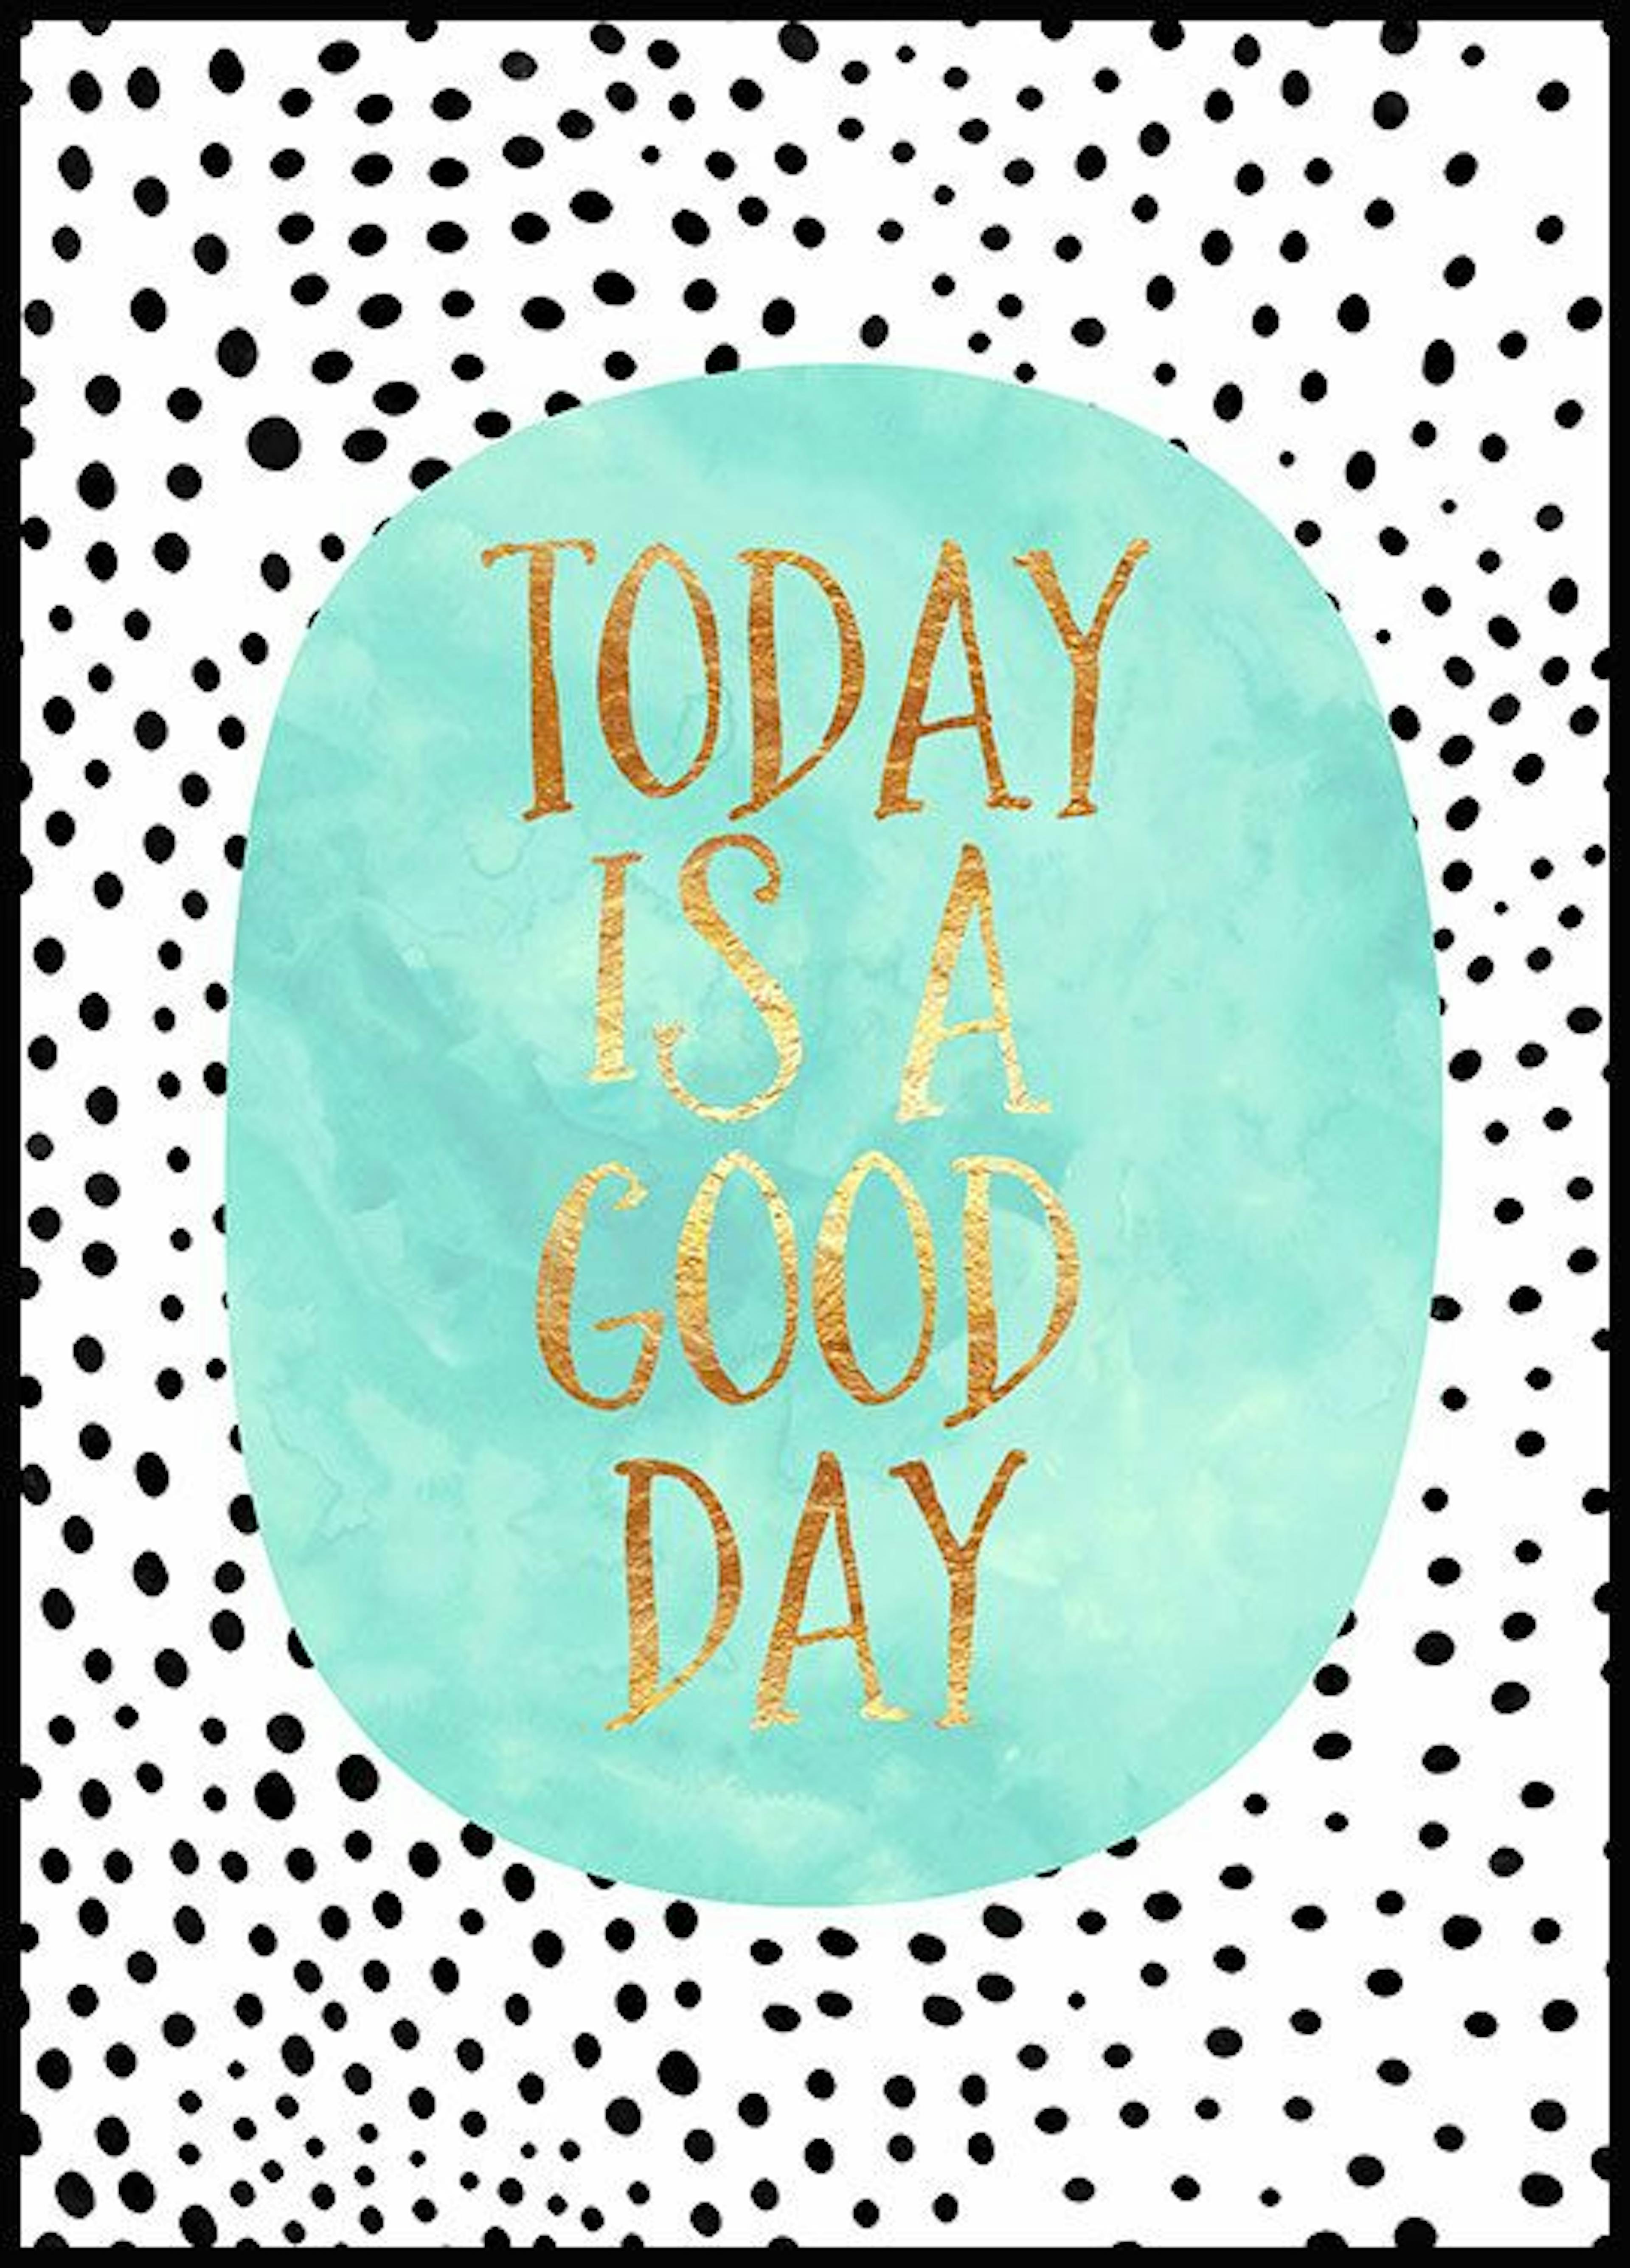 Today is a Good Day Poster 0